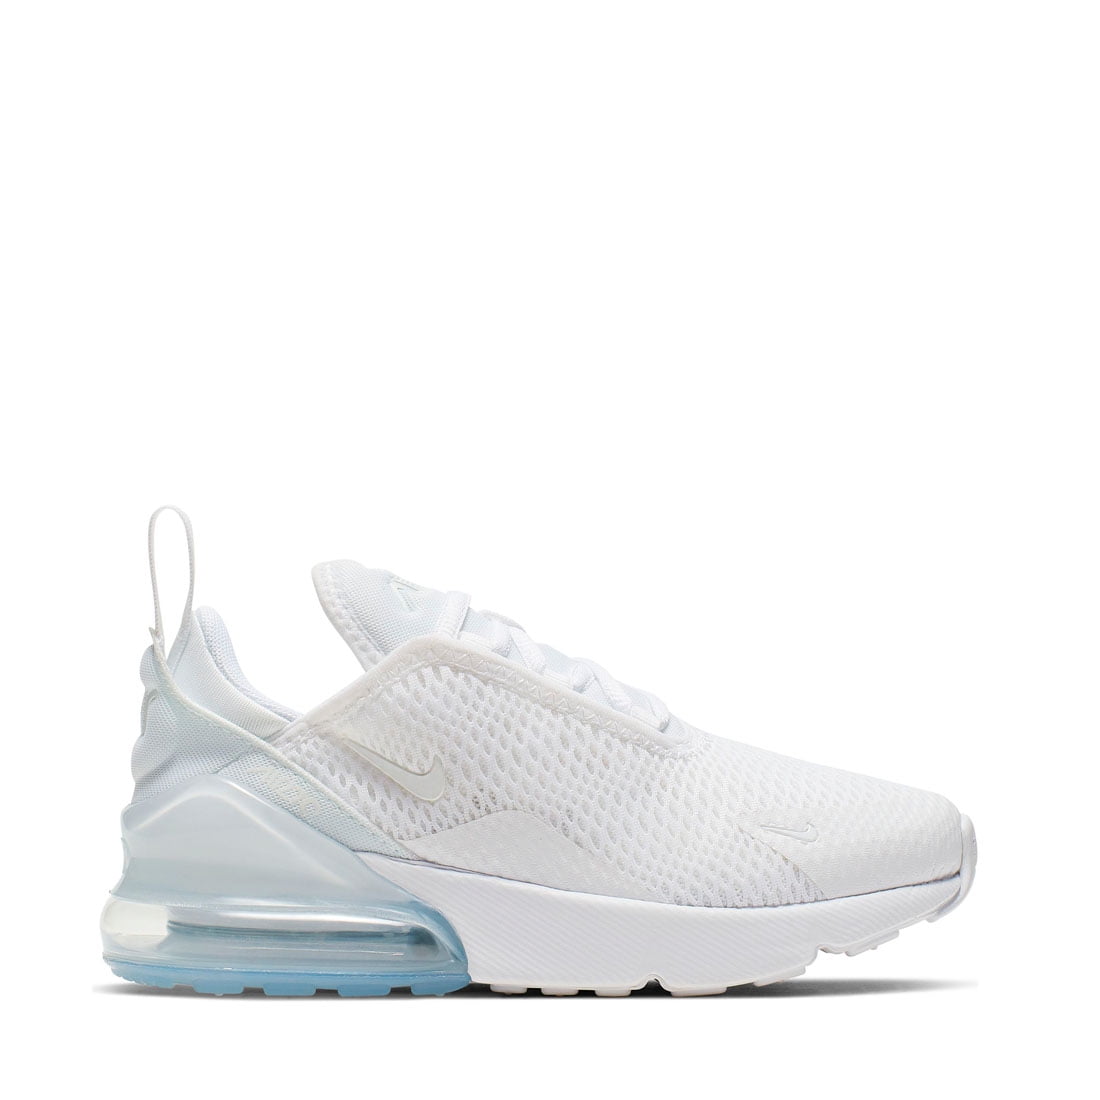 Nike Air Max 270-PS Unisex/Adult shoe size 2.5 Young Kids Casual AO2372-103 White/ Silver - Walmart.com